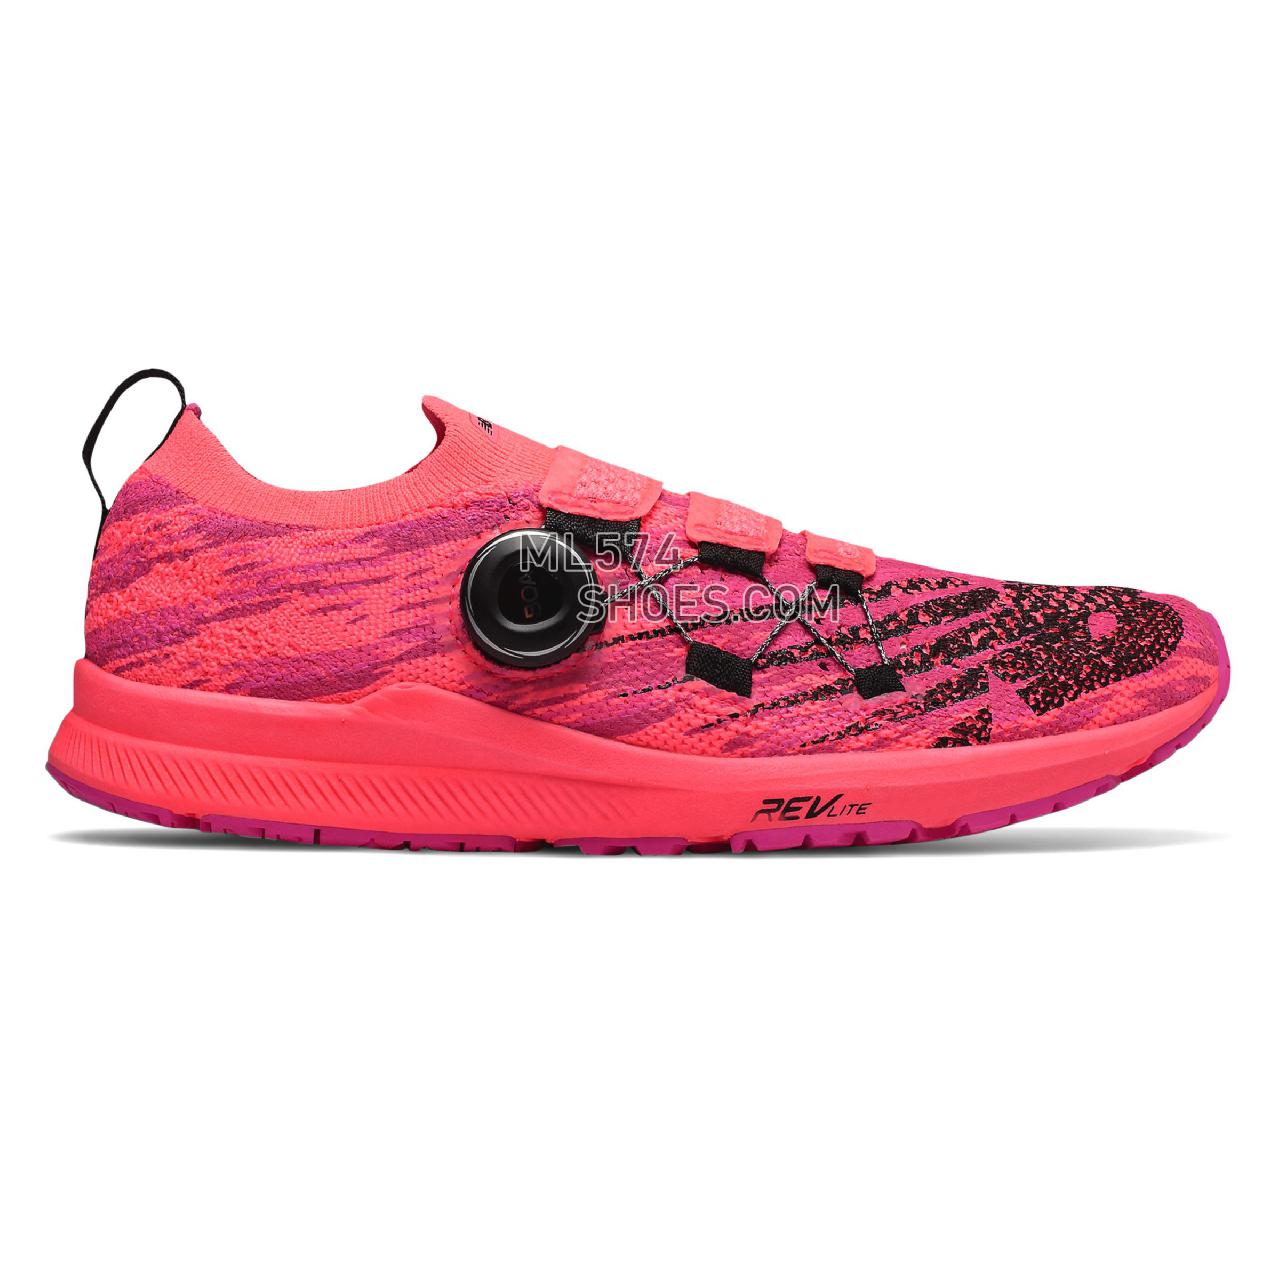 New Balance 1500T2 Boa - Women's Track Spikes And Cross Country - Guava with Peony and Black - W1500TB2